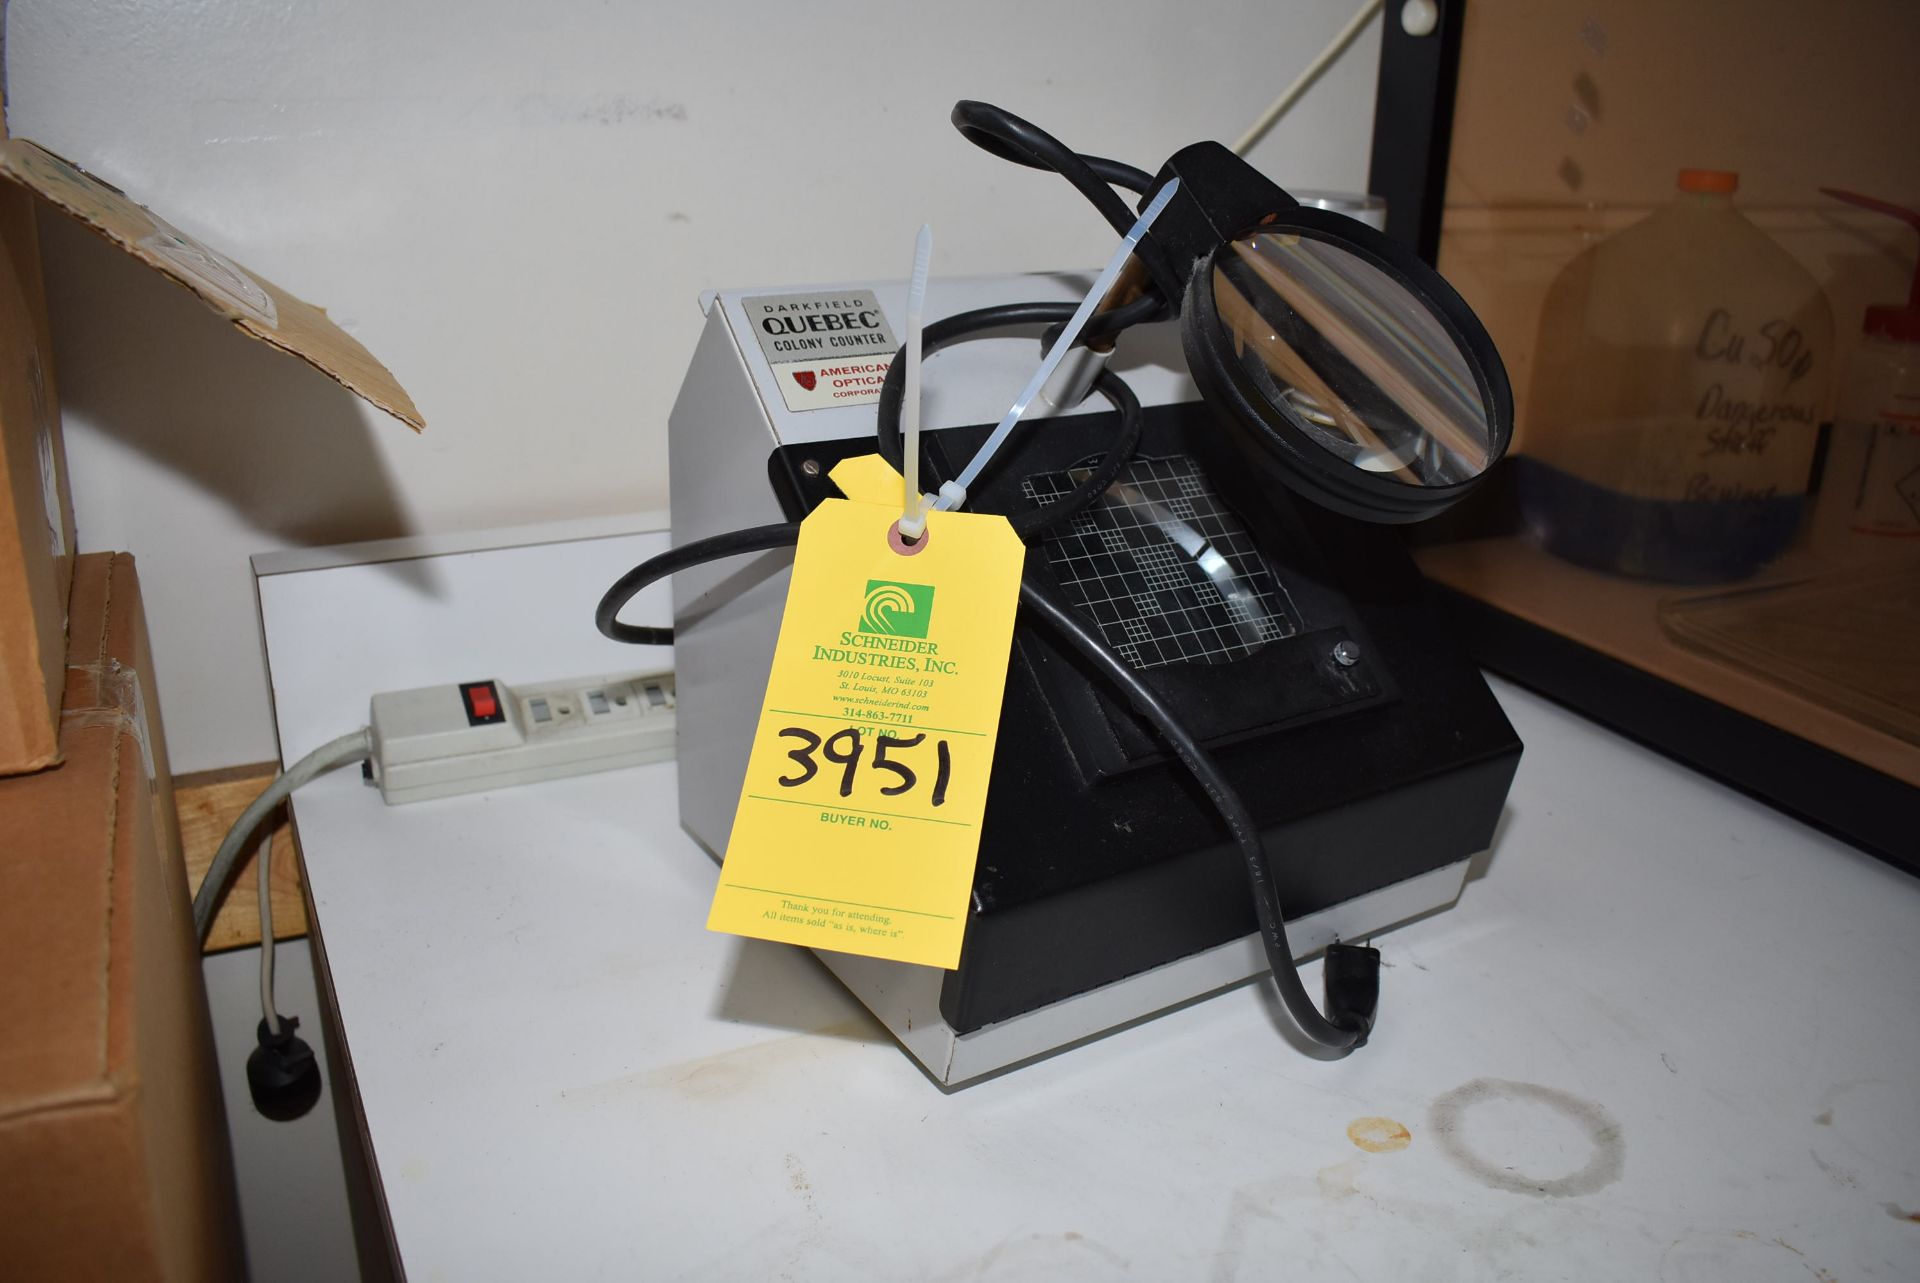 American Optical Darkfield Quebec Colony Counter Model #3325, RIGGING FEE: $15